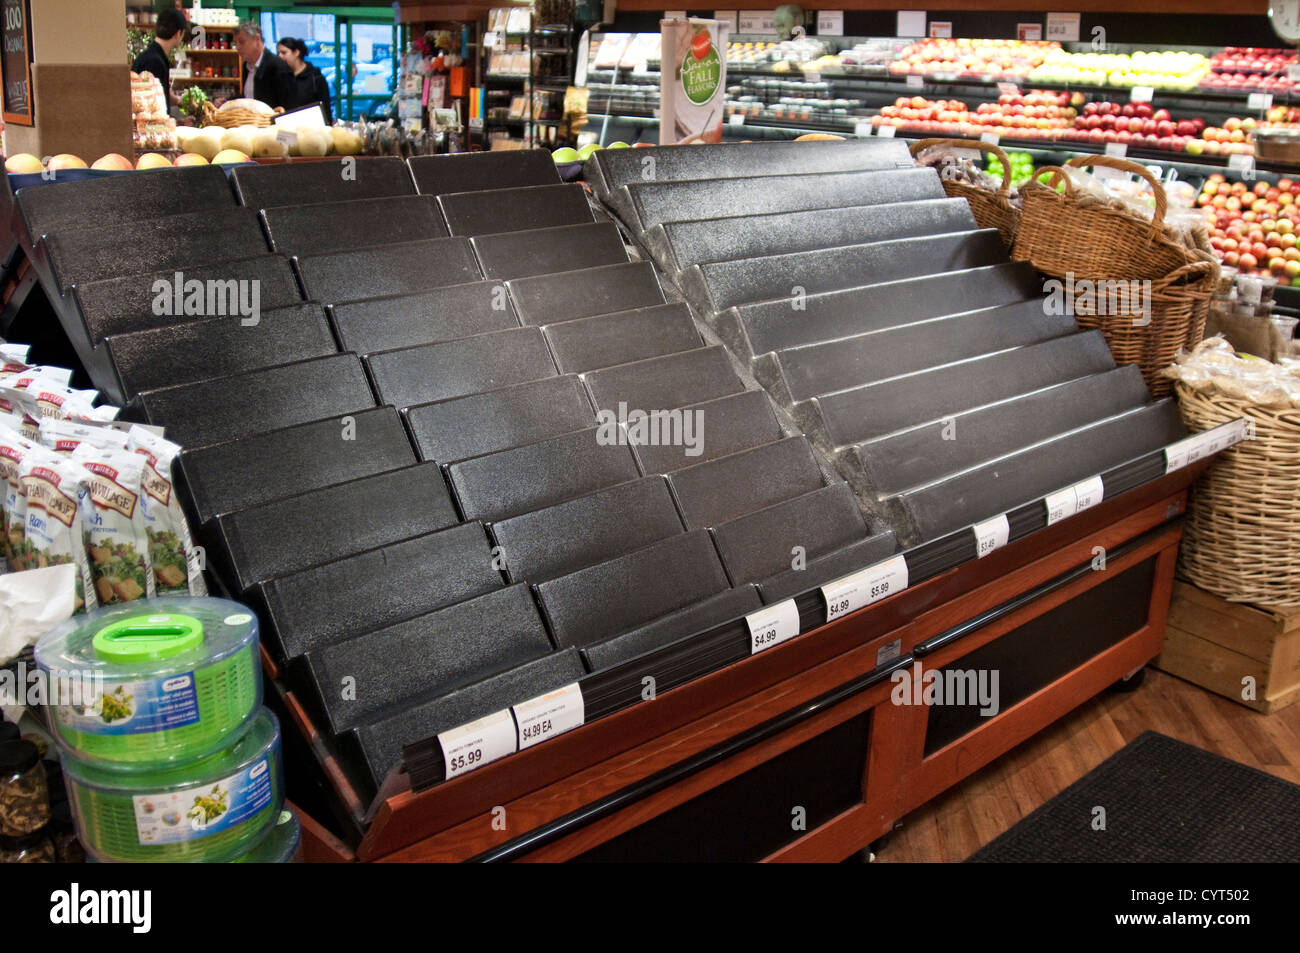 Empty shelves in Kings Supermarket in Cresskill, NJ, evidence of panic buying in the wake of Hurricane Sandy which hit Oct 2012. Stock Photo